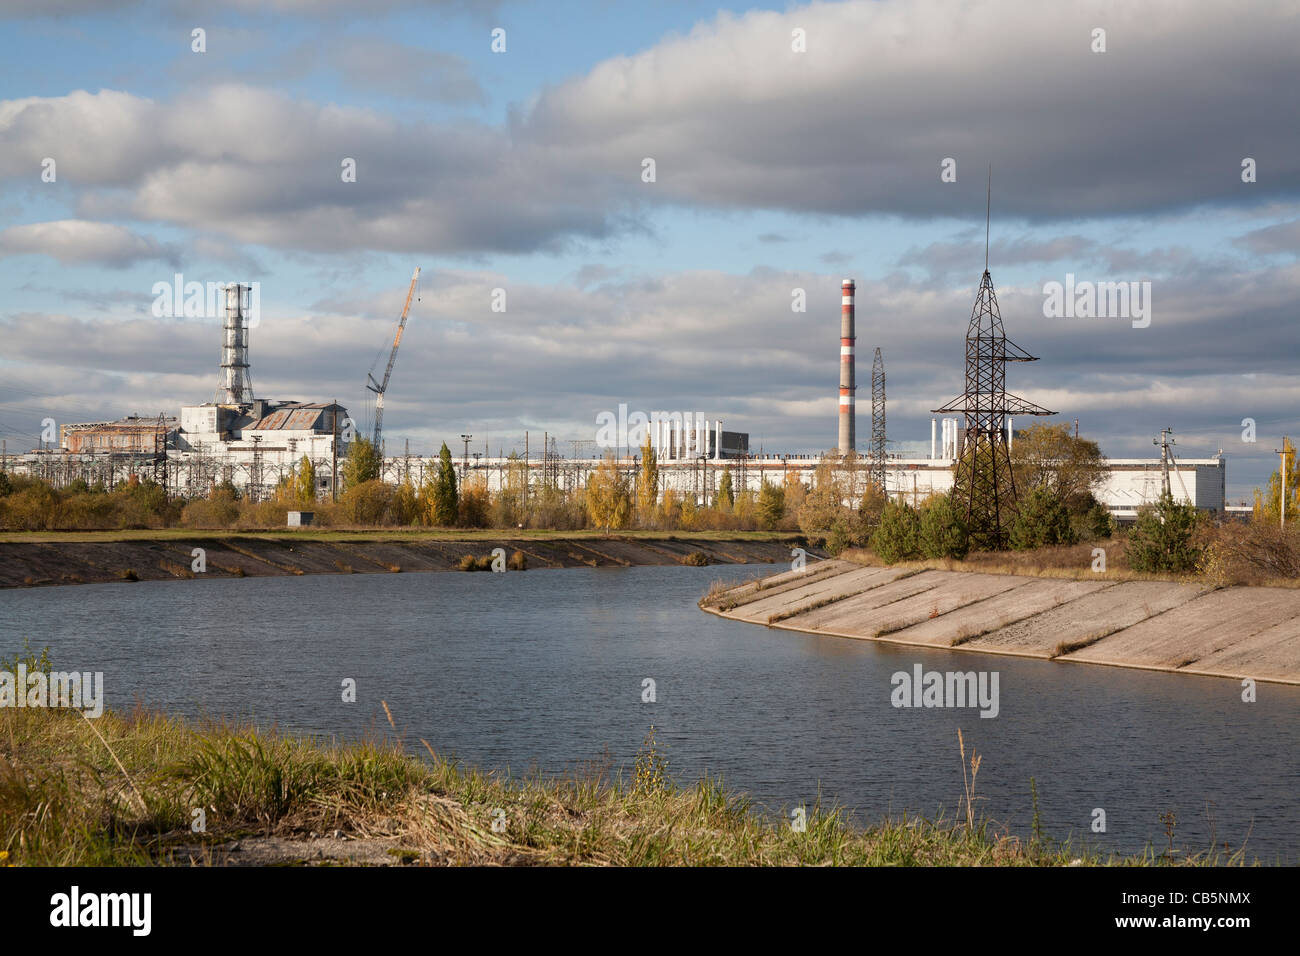 The Pripyat River or Prypiat River with the Chernobyl nuclear power plant in the background Chernobyl Ukraine Stock Photo